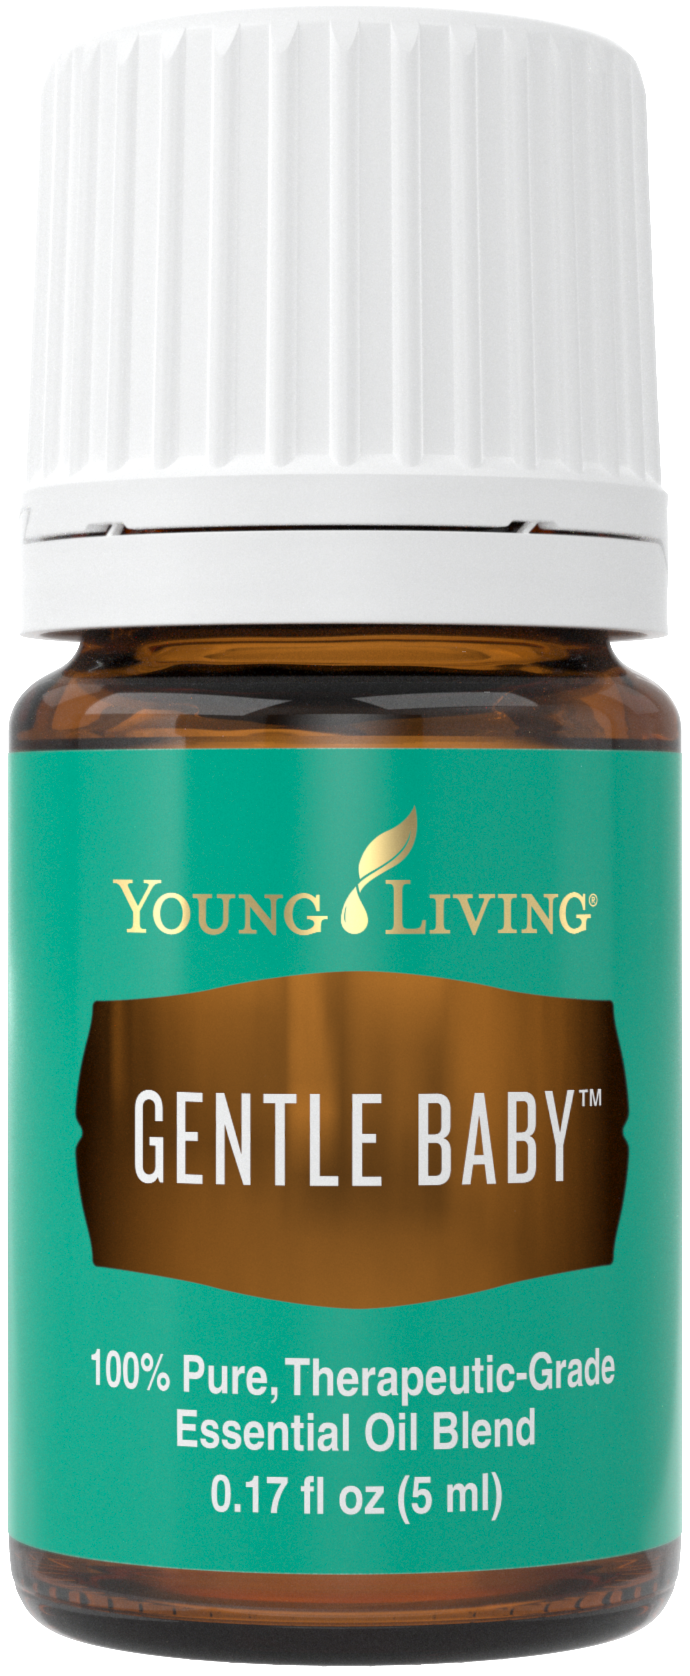 Gentle Baby 5ml Silo.png